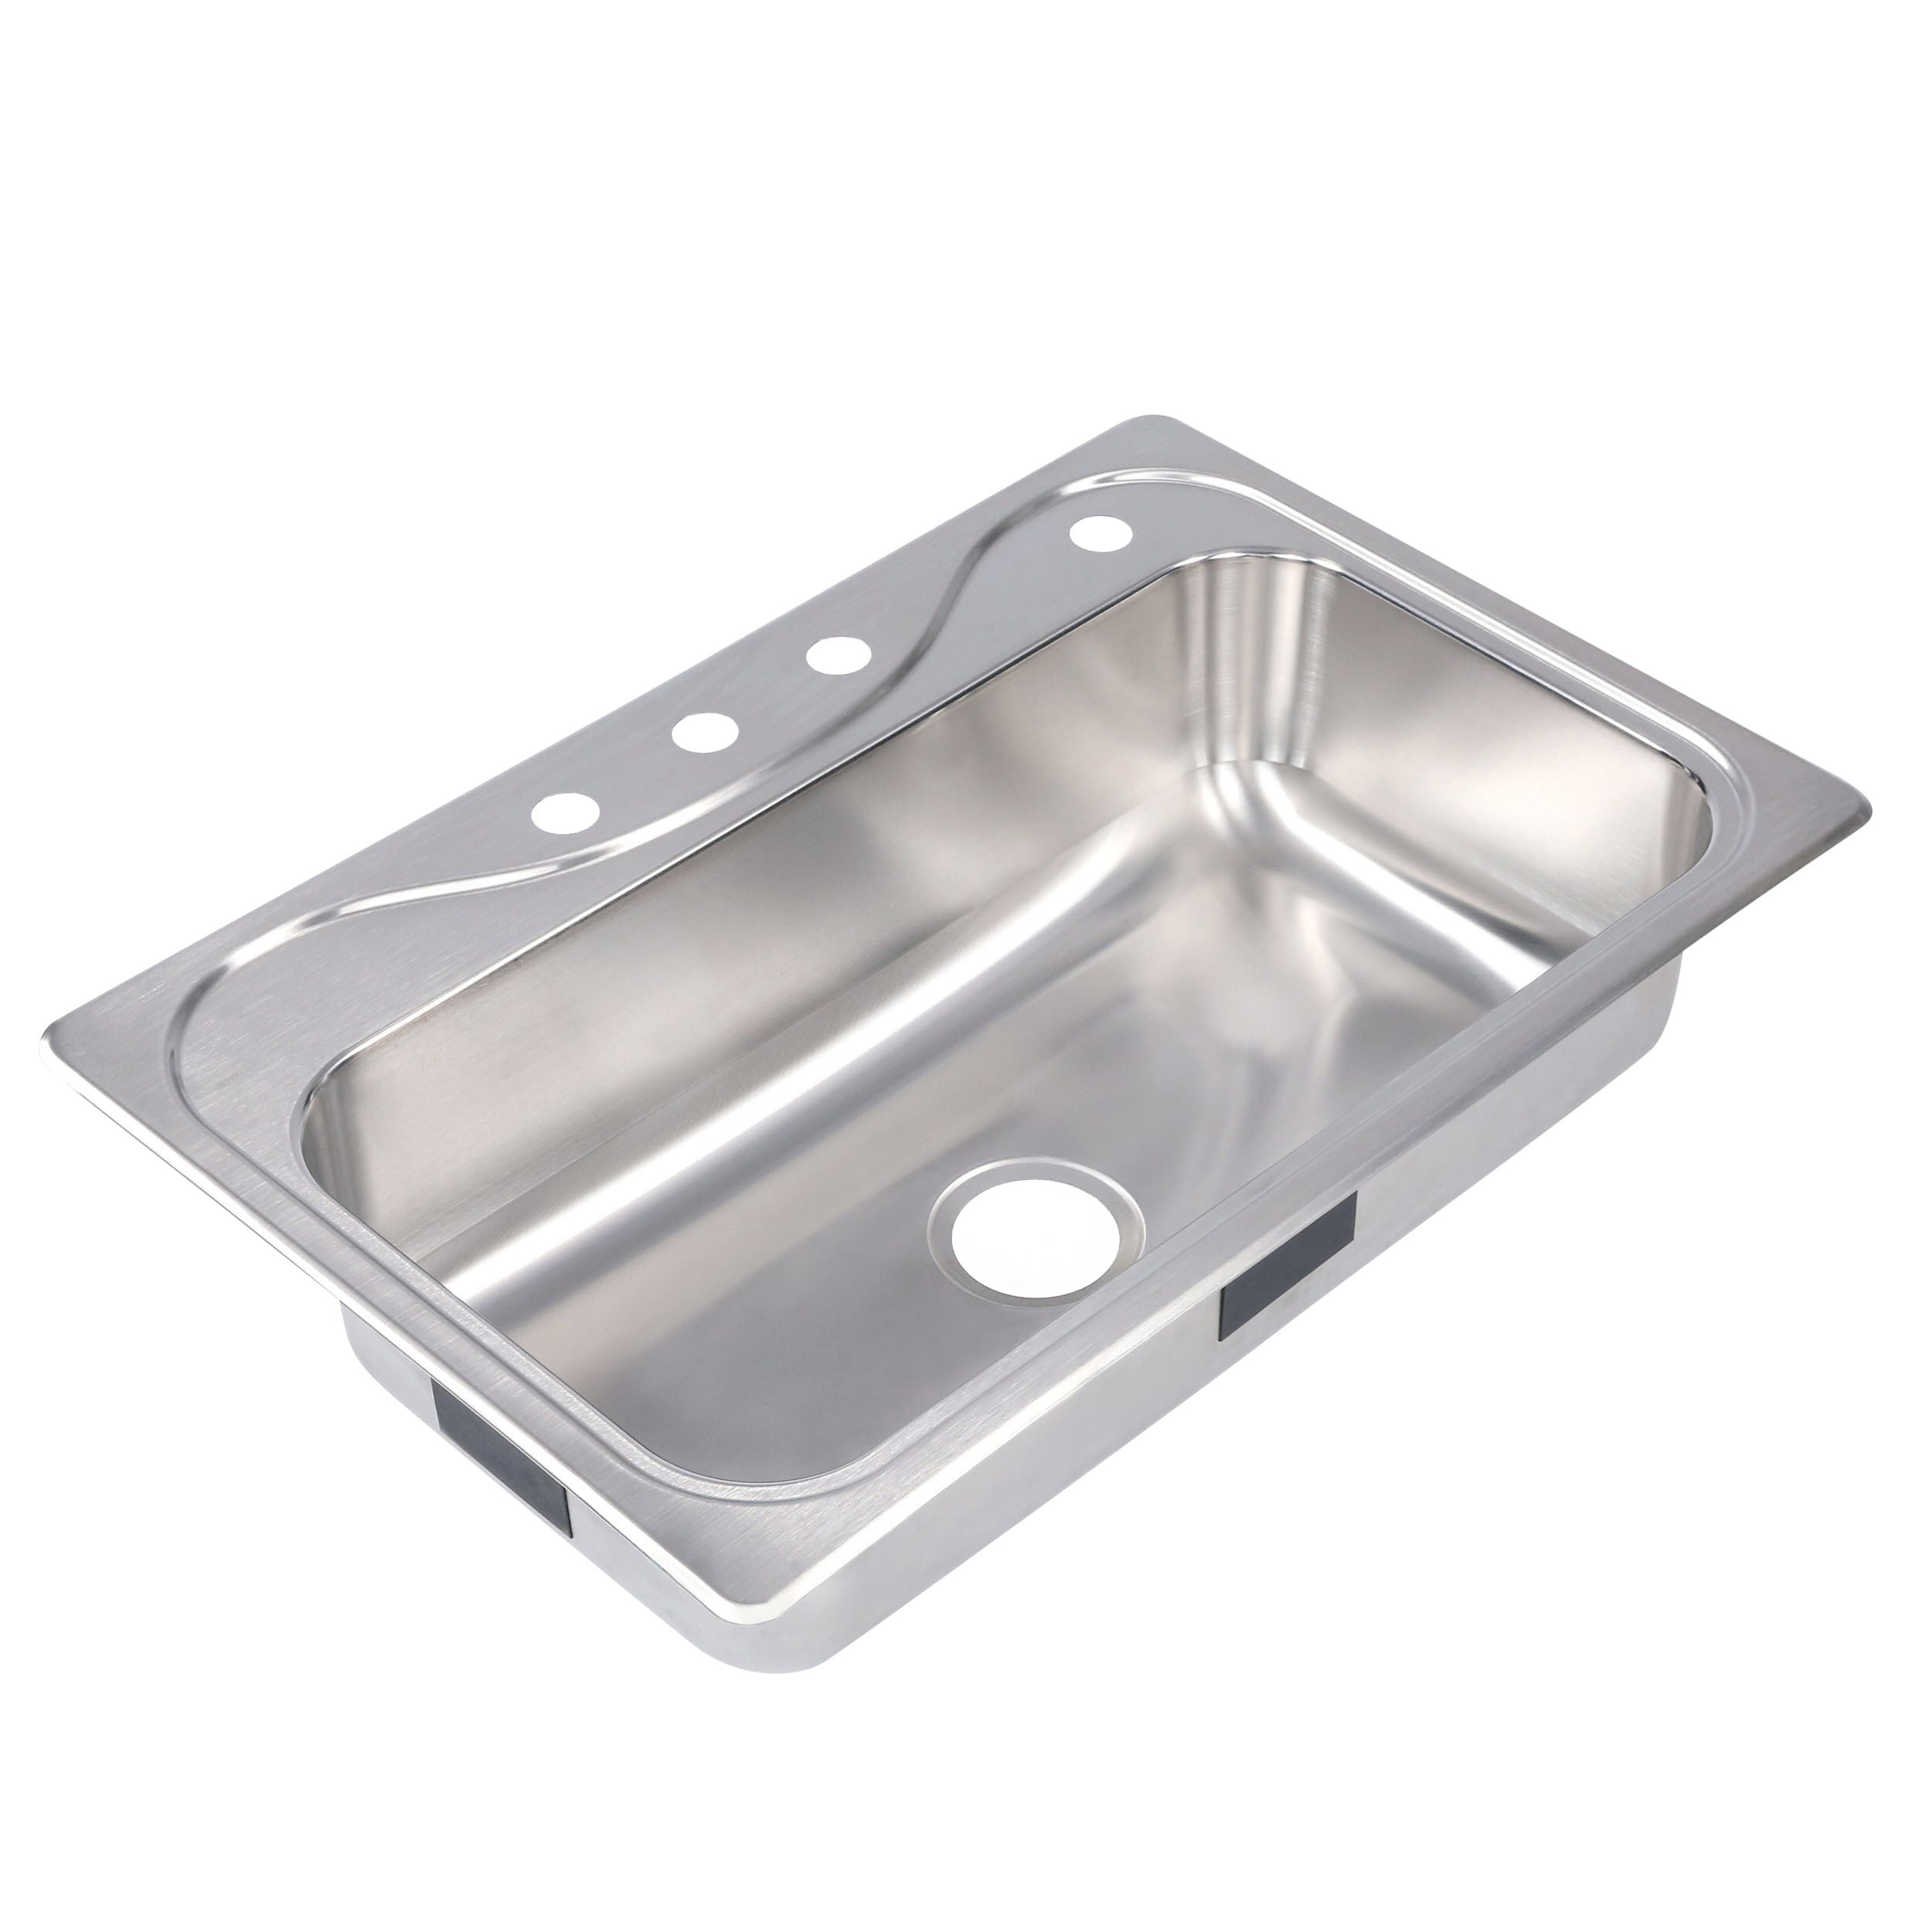 610x510mm Brushed Stainless Steel Inset Large Bowl Kitchen Sink A28 Sterling BS 